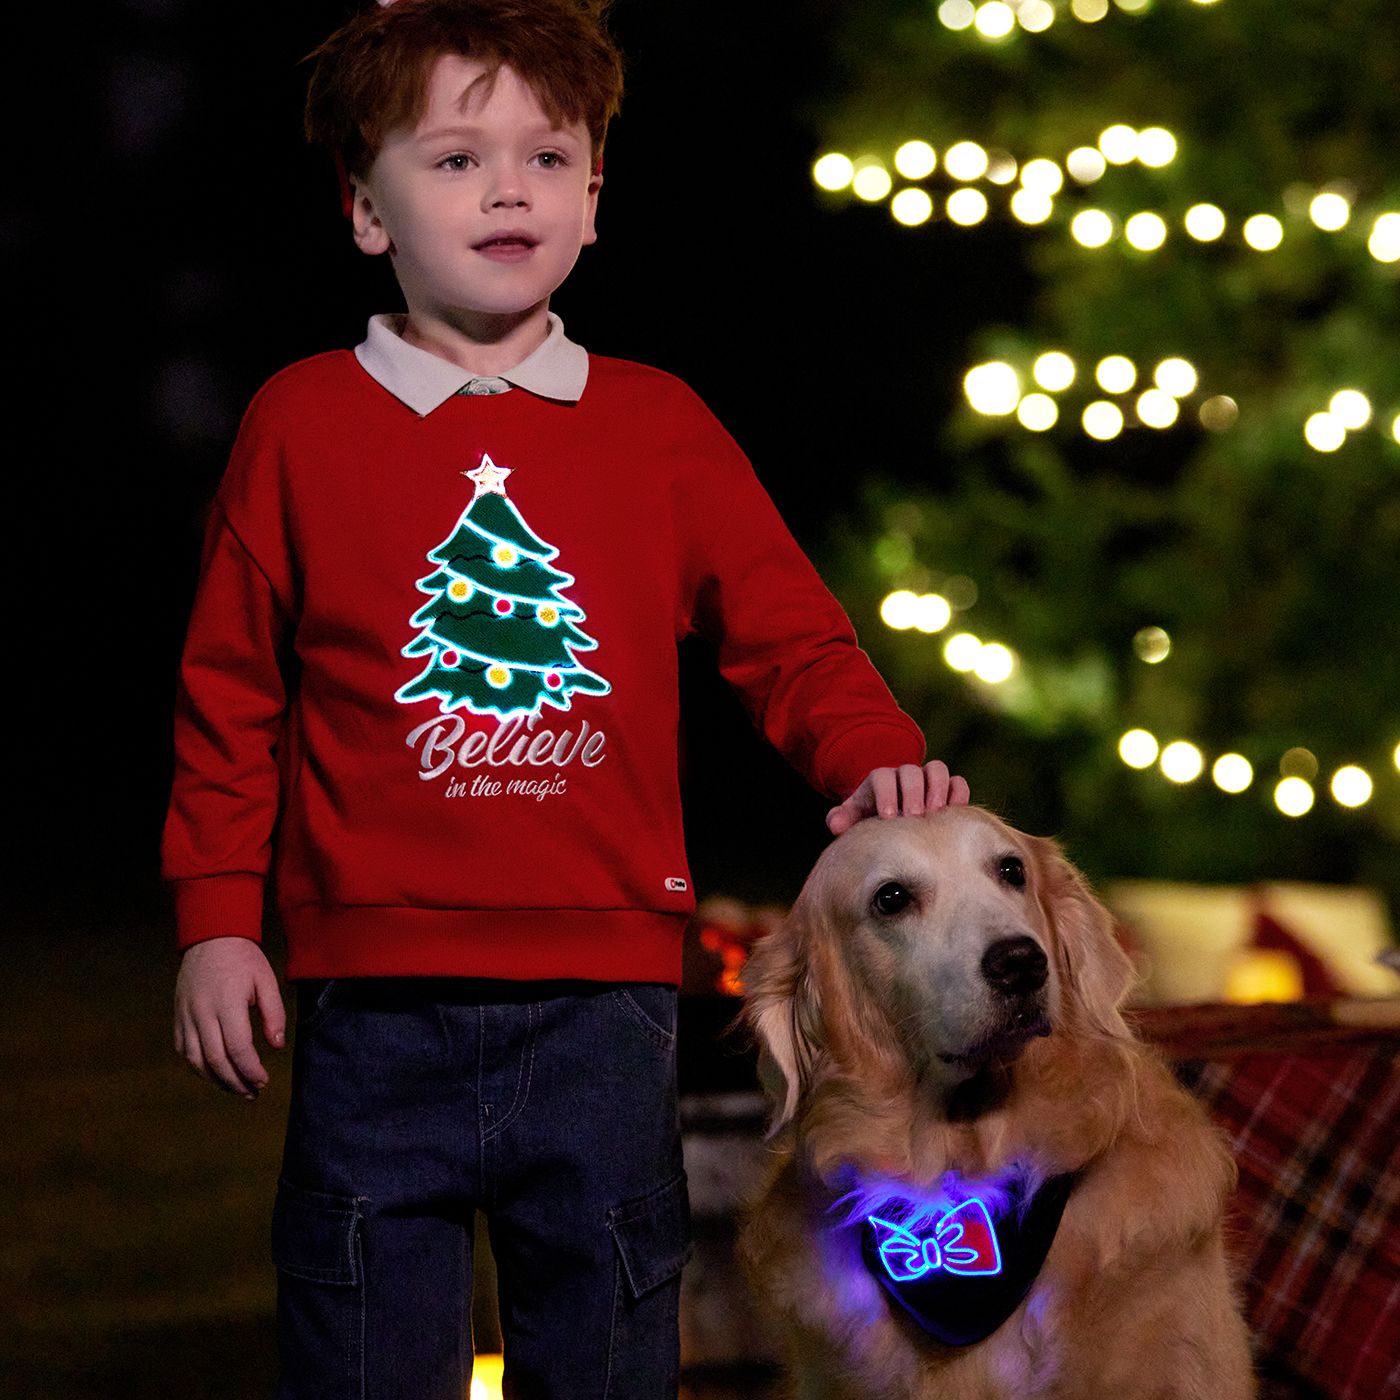 Go-Glow Christmas Family Matching Long-sleeve Tops with Christmas Tree glowing & Illuminating Dress 